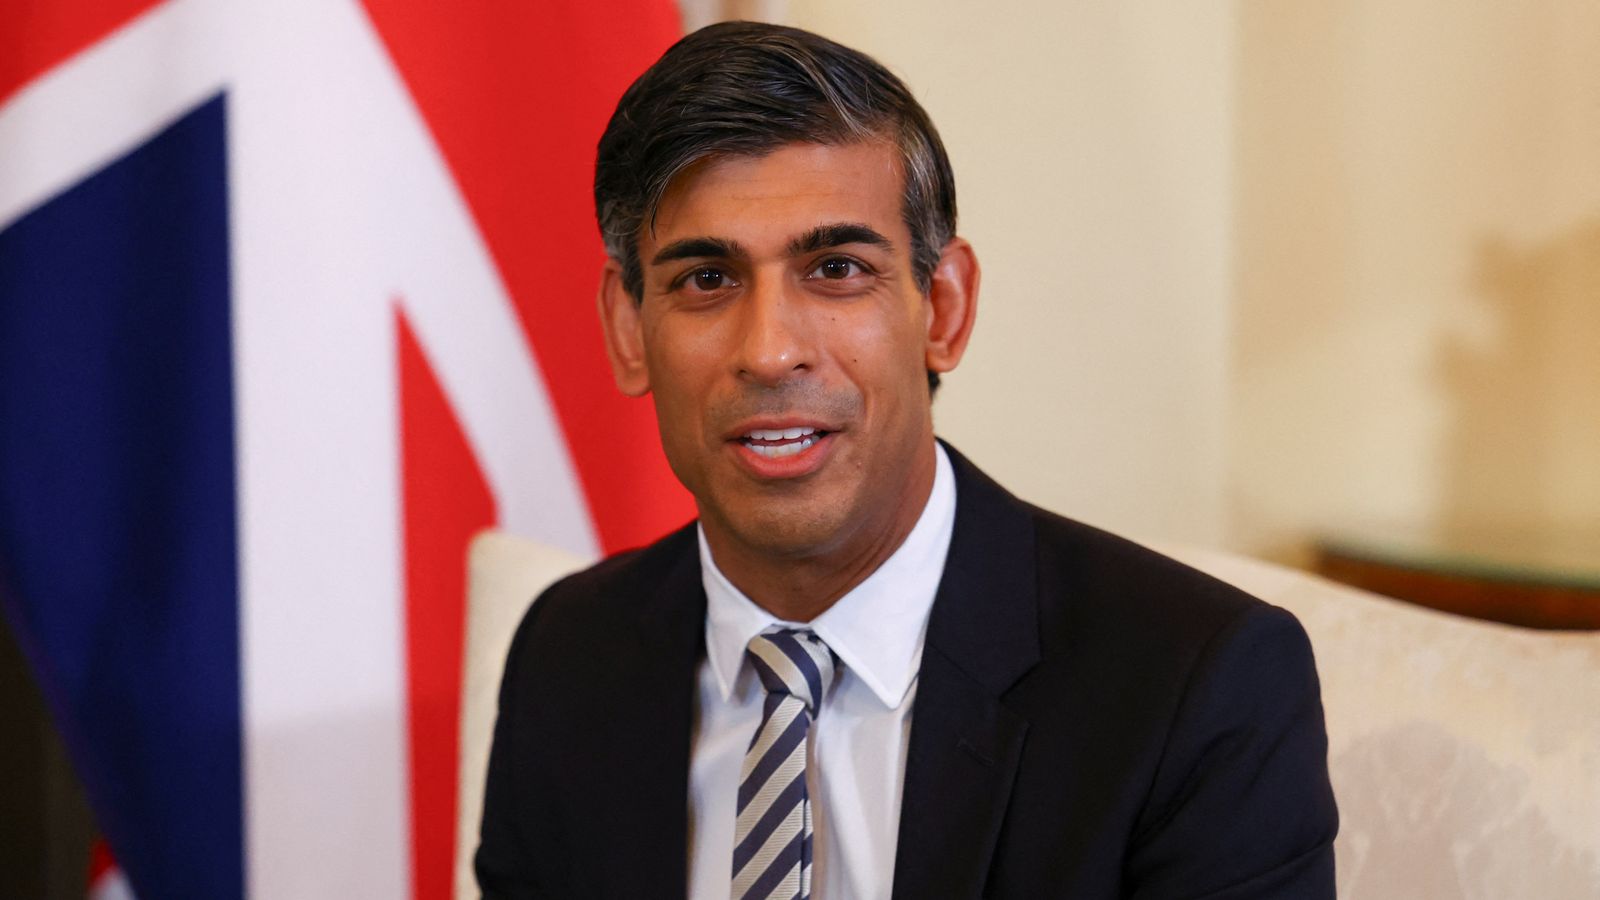 Rishi Sunak to visit Israel on Thursday as part of trip to Middle East 